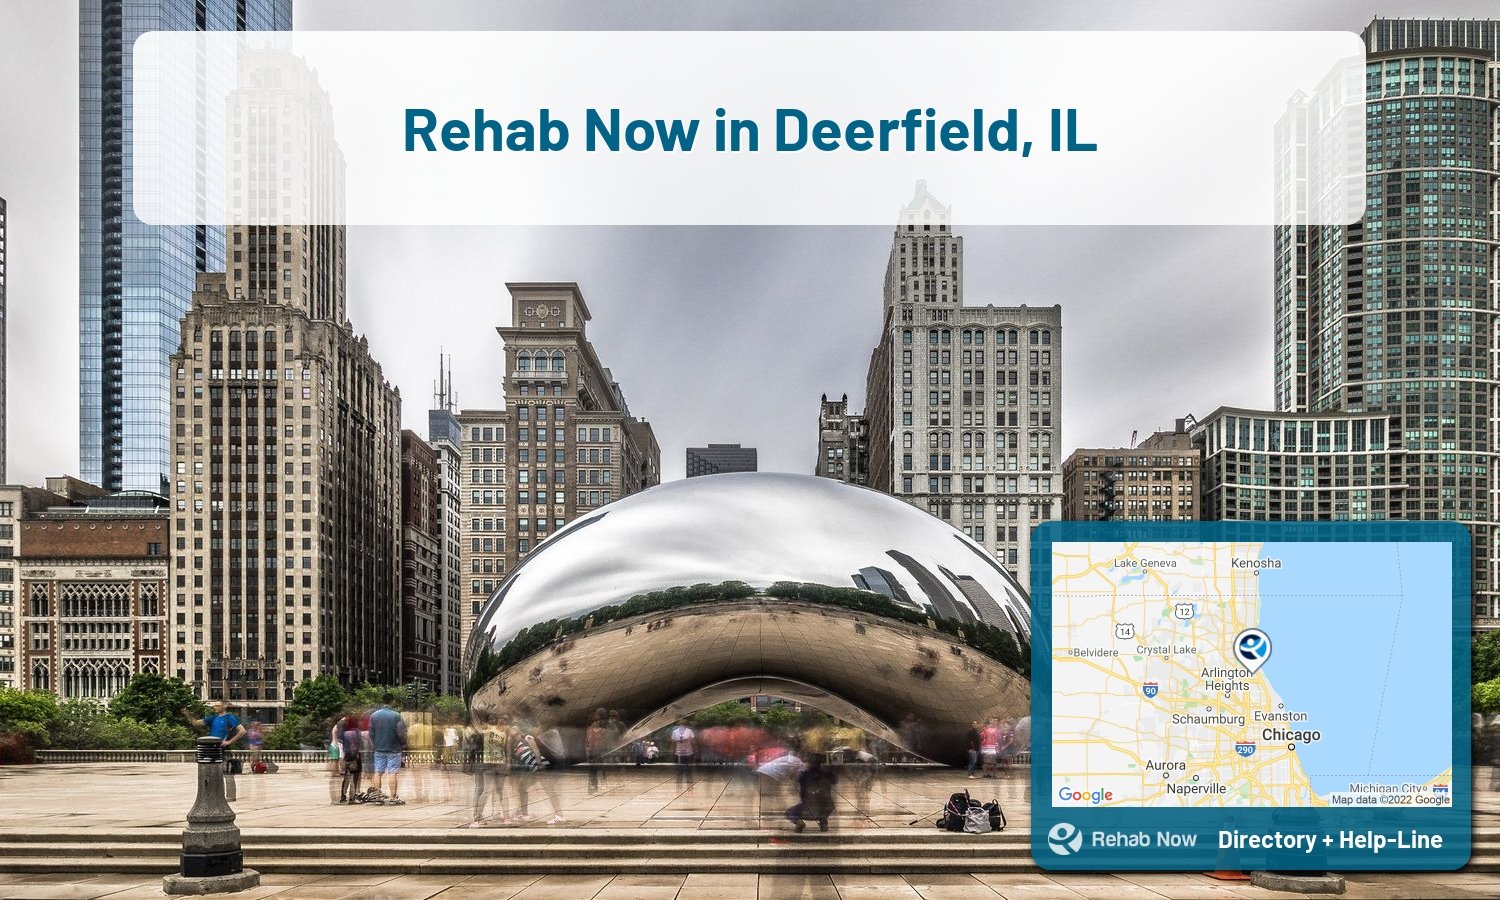 Deerfield, IL Treatment Centers. Find drug rehab in Deerfield, Illinois, or detox and treatment programs. Get the right help now!